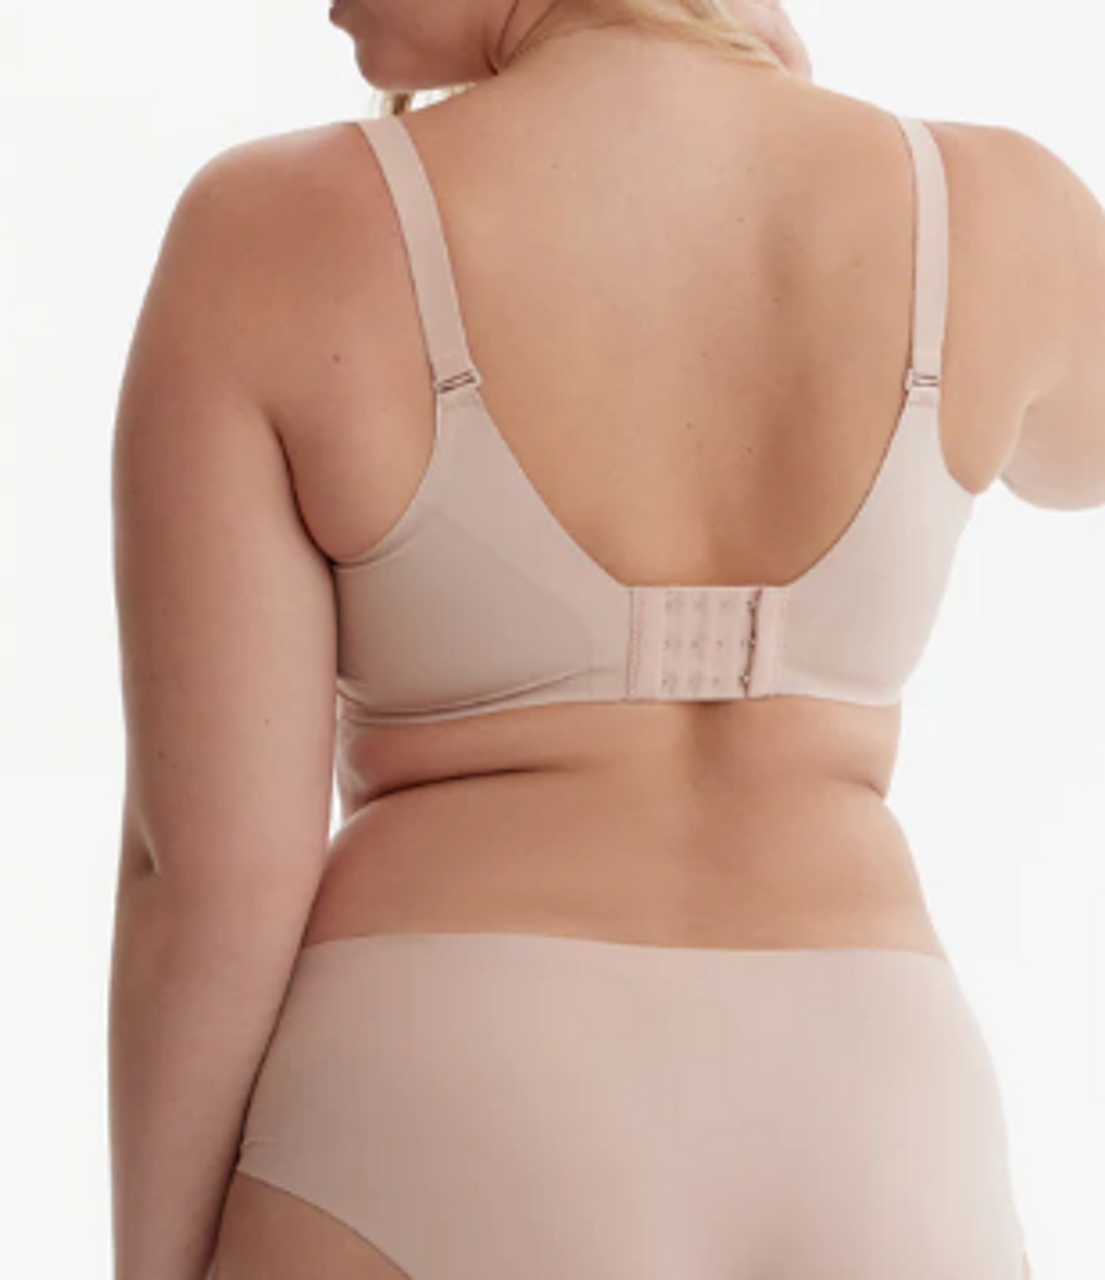 https://cdn11.bigcommerce.com/s-r23r6d/images/stencil/1280x1280/products/12432/25258/Ultra_Soft_Omni_Maternity_by_Momcozy_Nursing_Bra_Preowned_used__91350.1697367732.png?c=2?imbypass=on